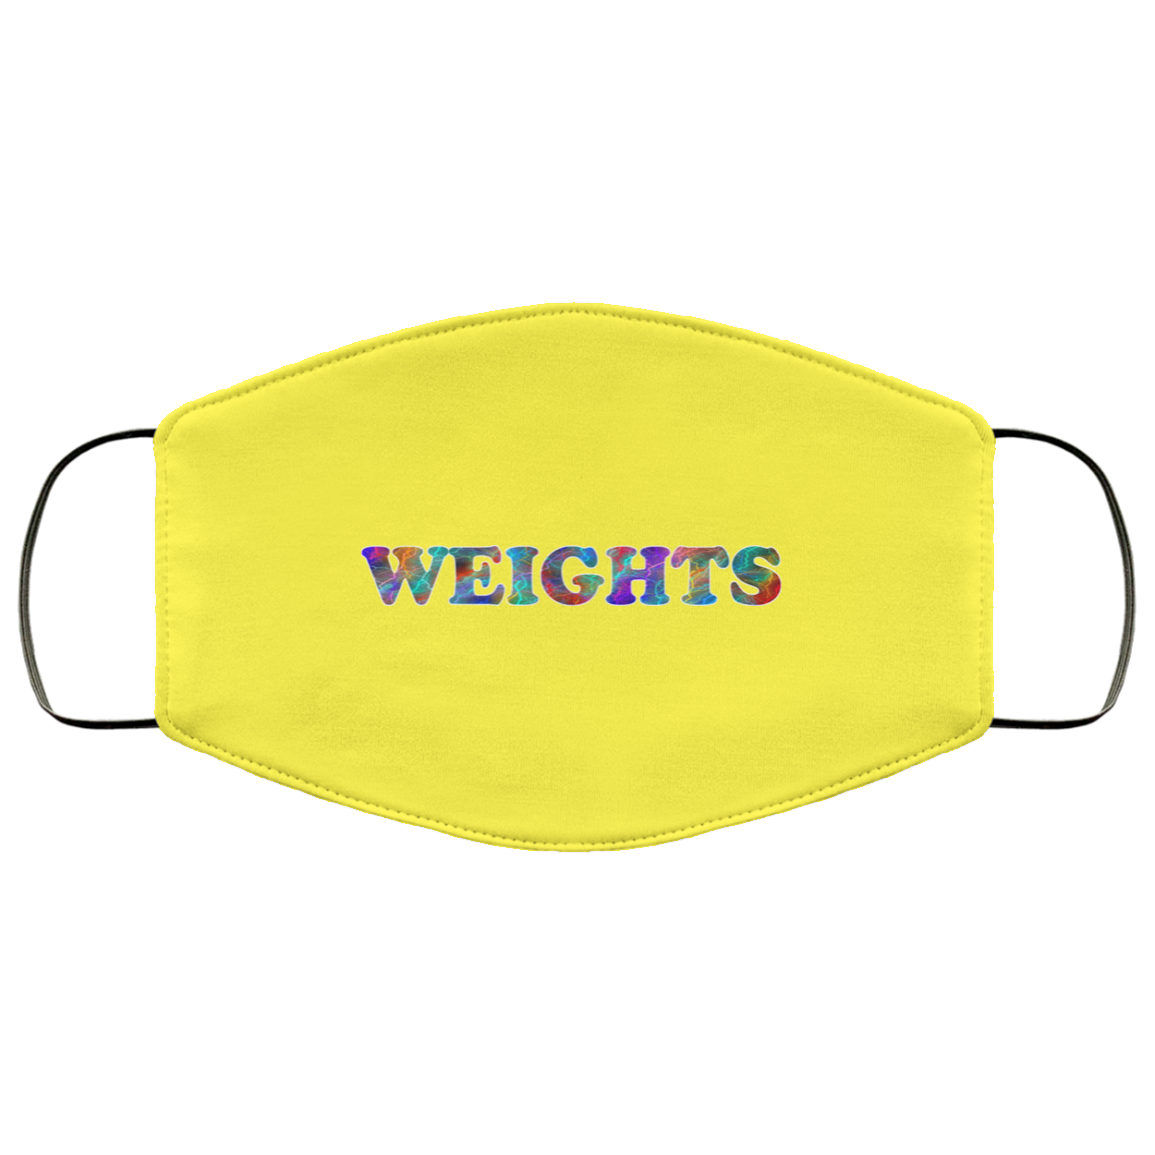 Weights 2 Layer Protective Mask